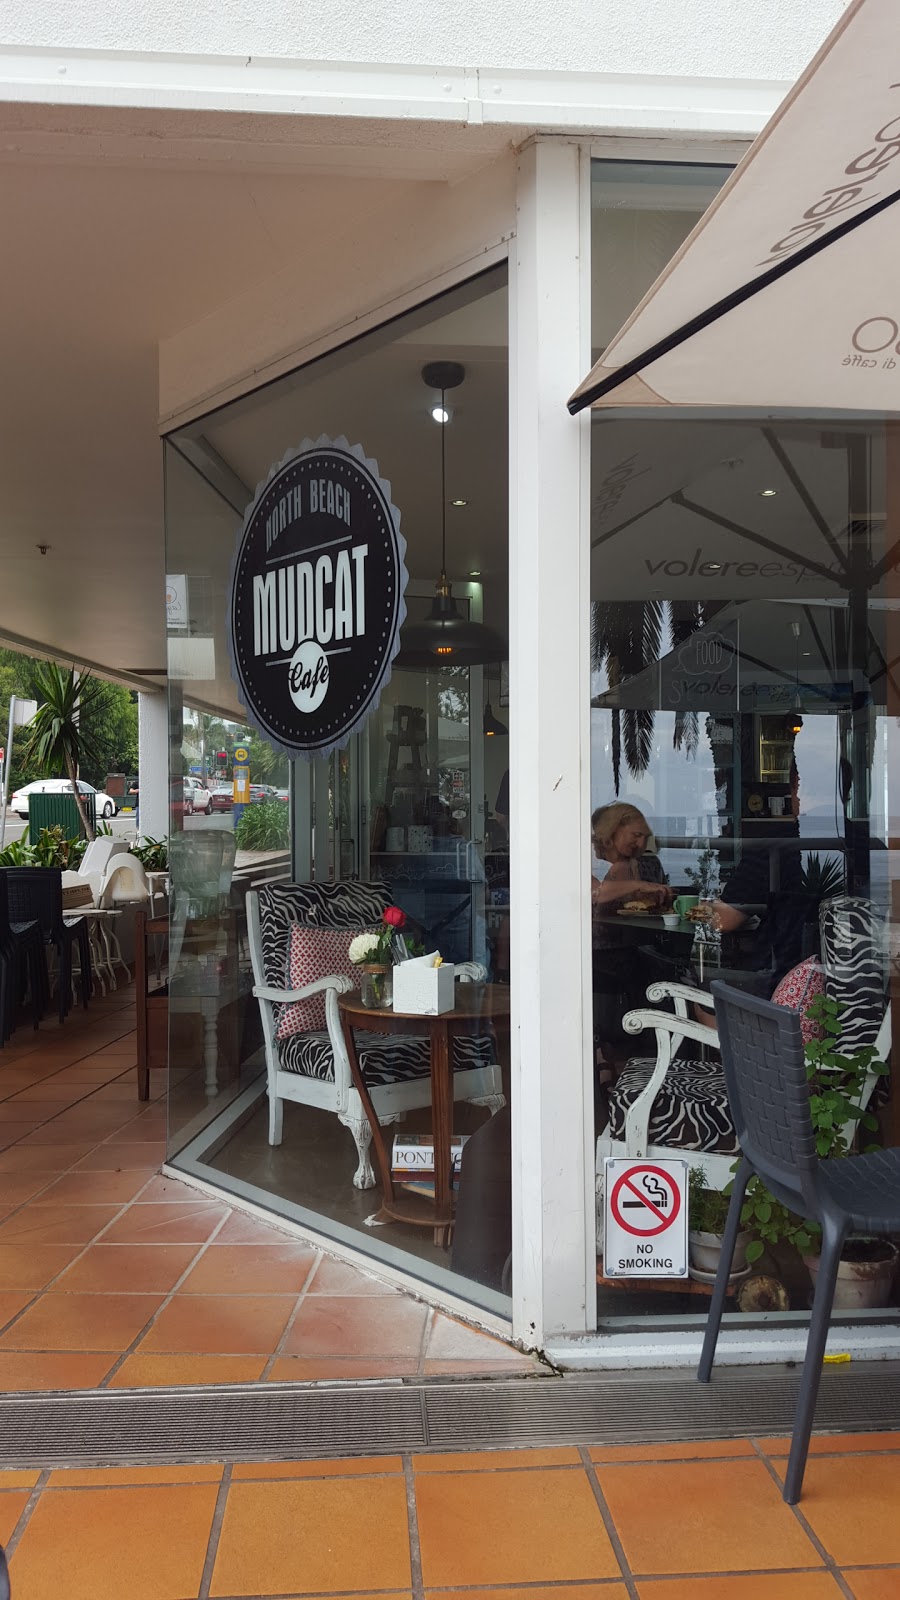 Mudcat Cafe | cafe | 7/2-14 Cliff Rd, North Wollongong NSW 2500, Australia | 0242273090 OR +61 2 4227 3090